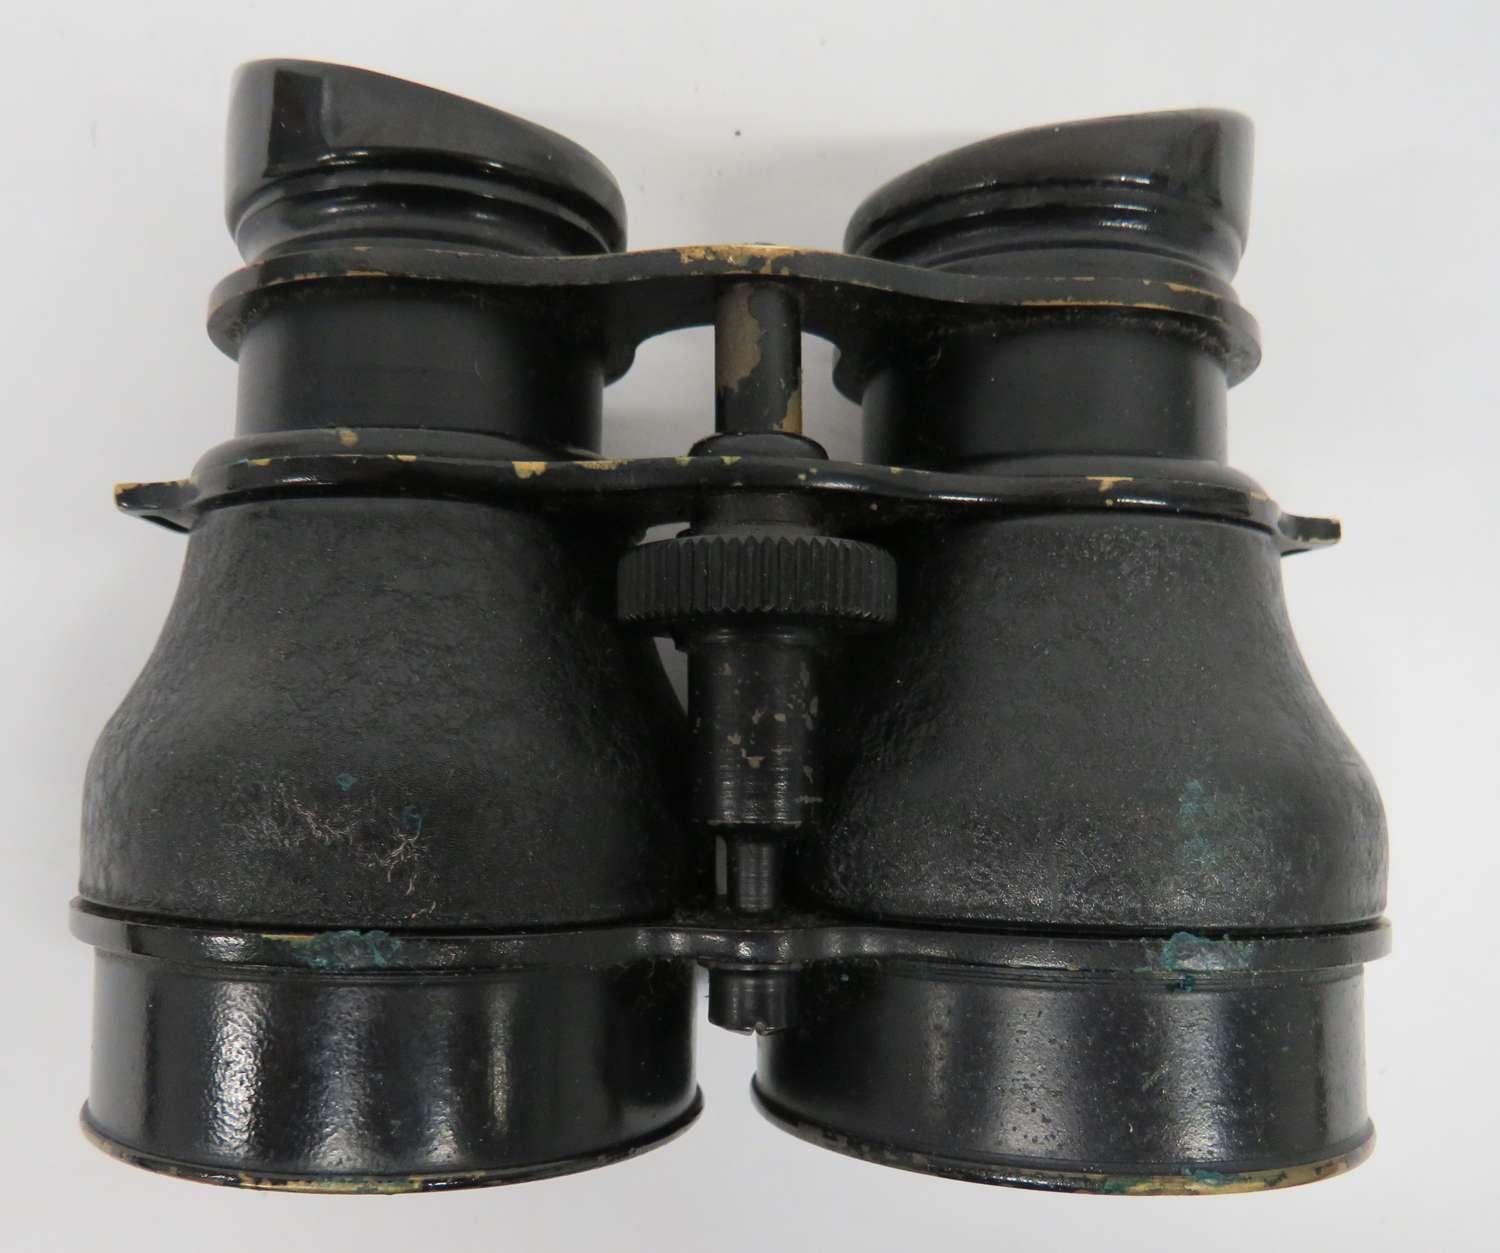 Scarce R.A.F /Airborne & Special Forces Night Use Binoculars